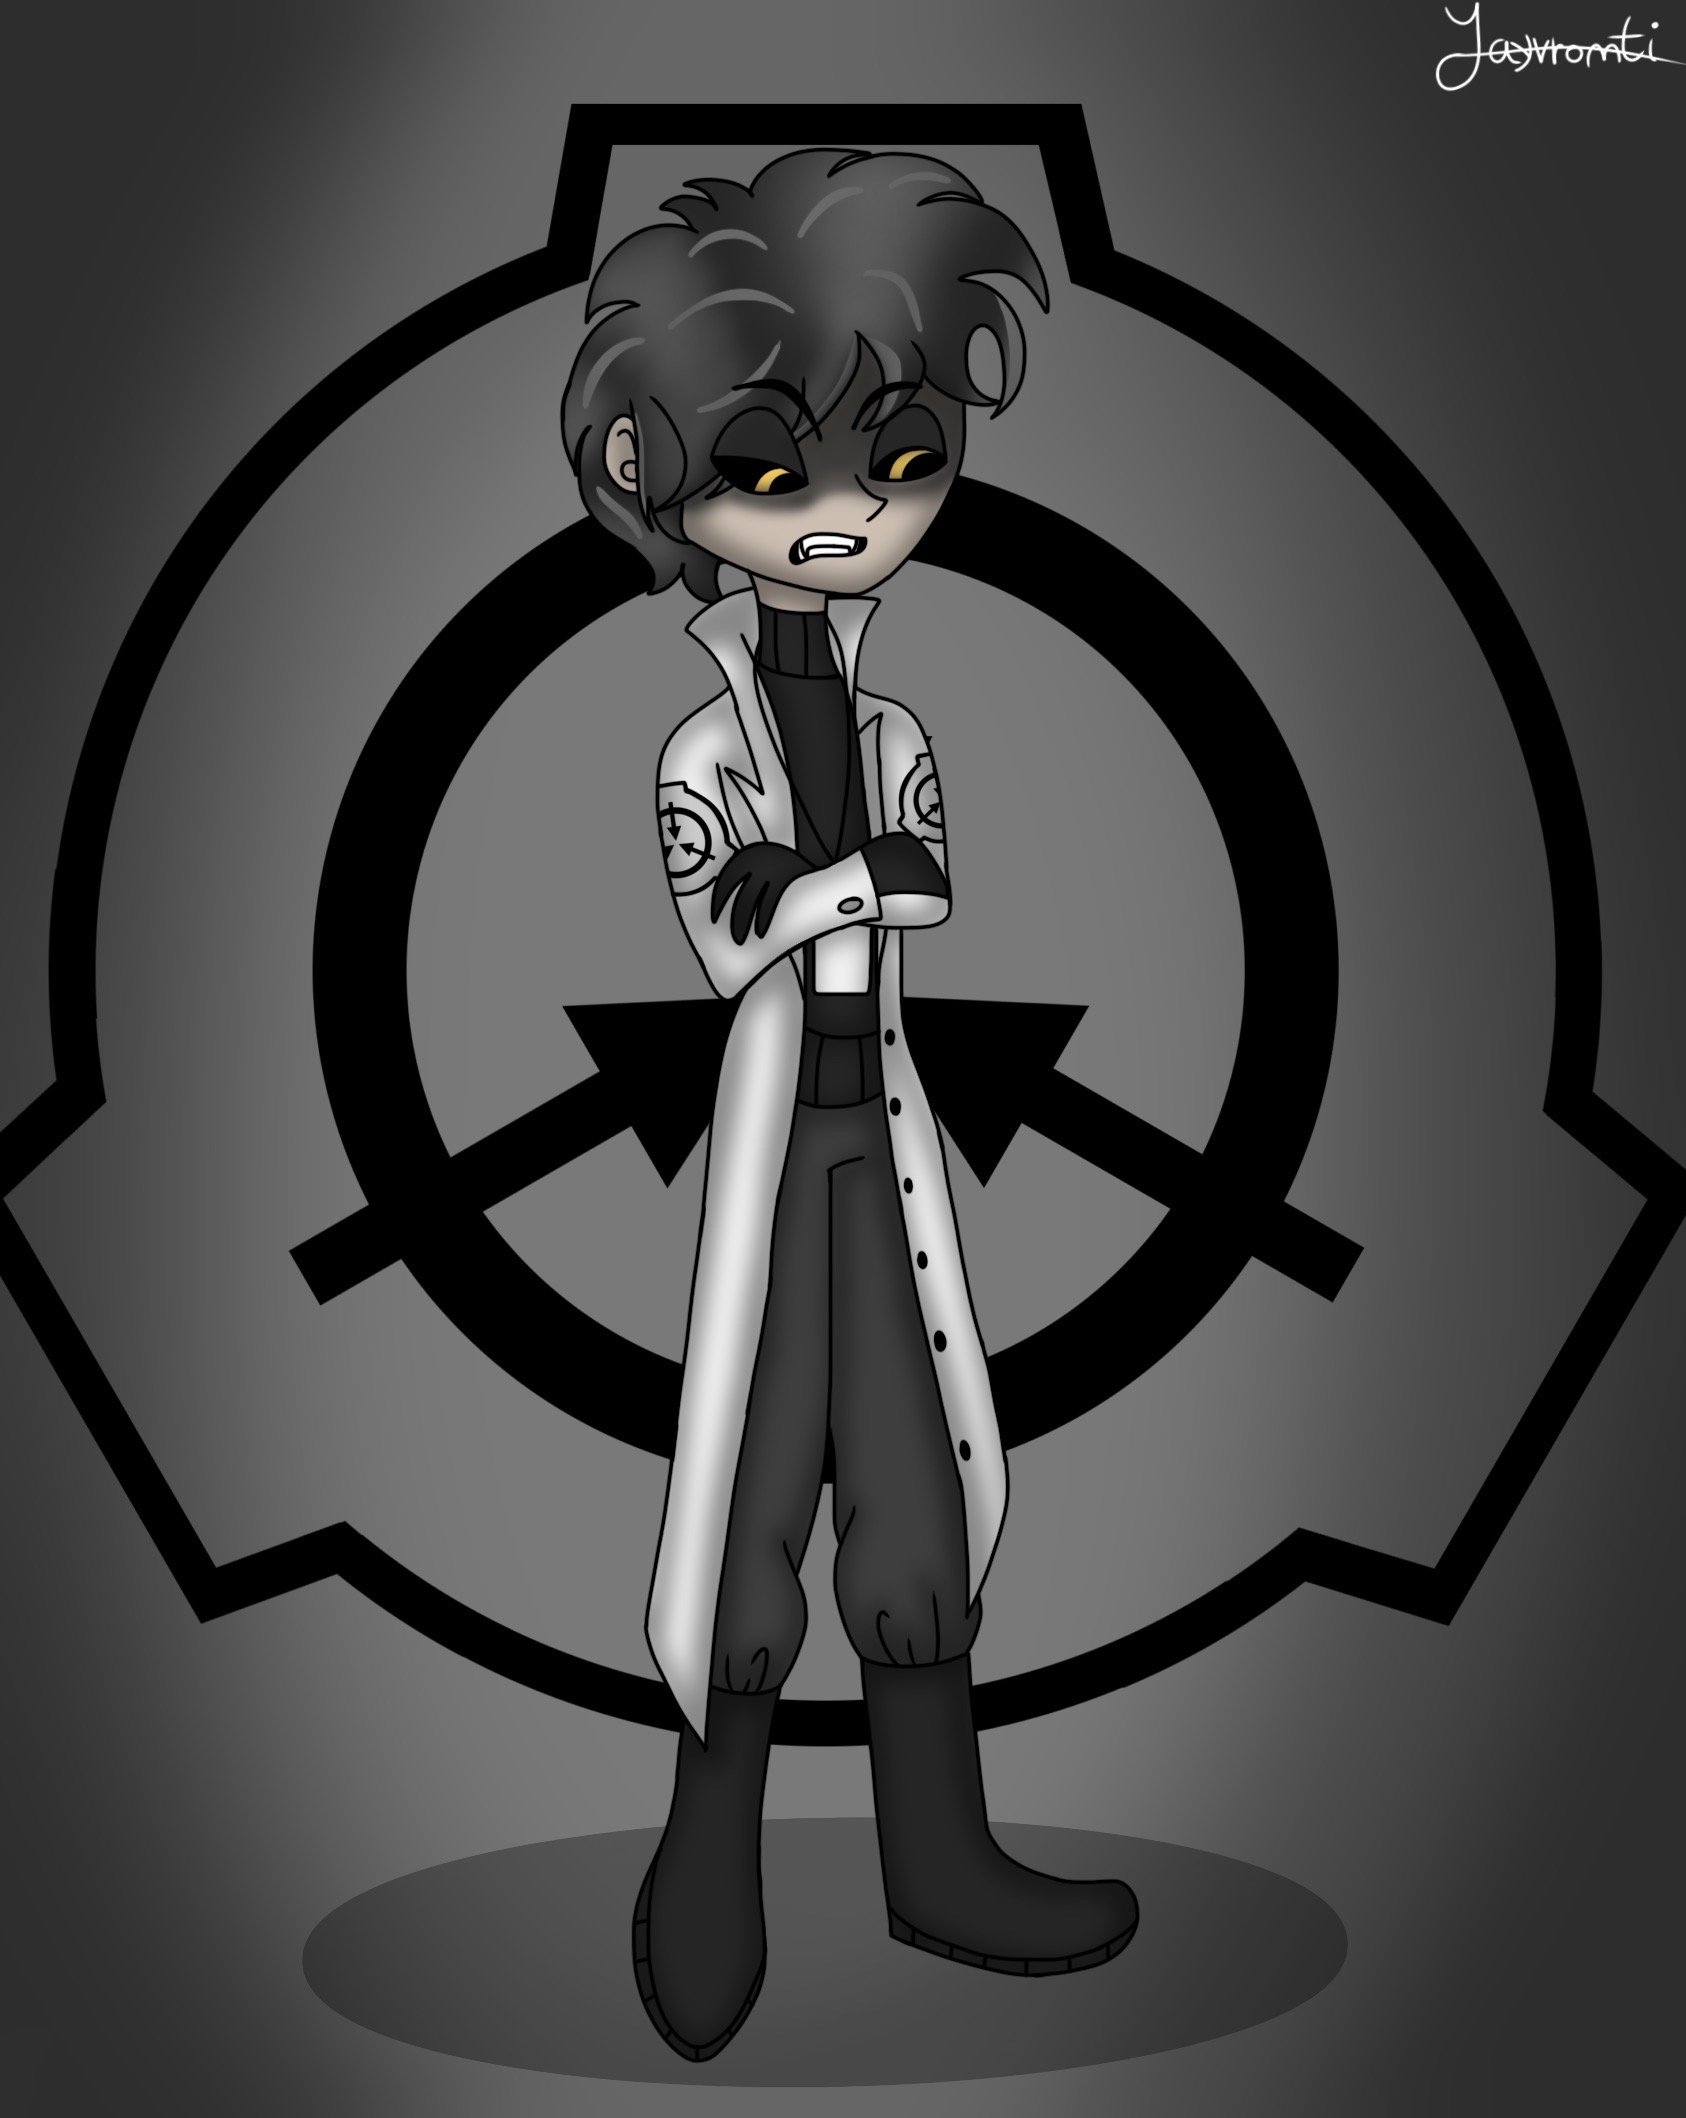 SCP-049 (Pfp and Avatar) by AndrewVideos510Art on DeviantArt